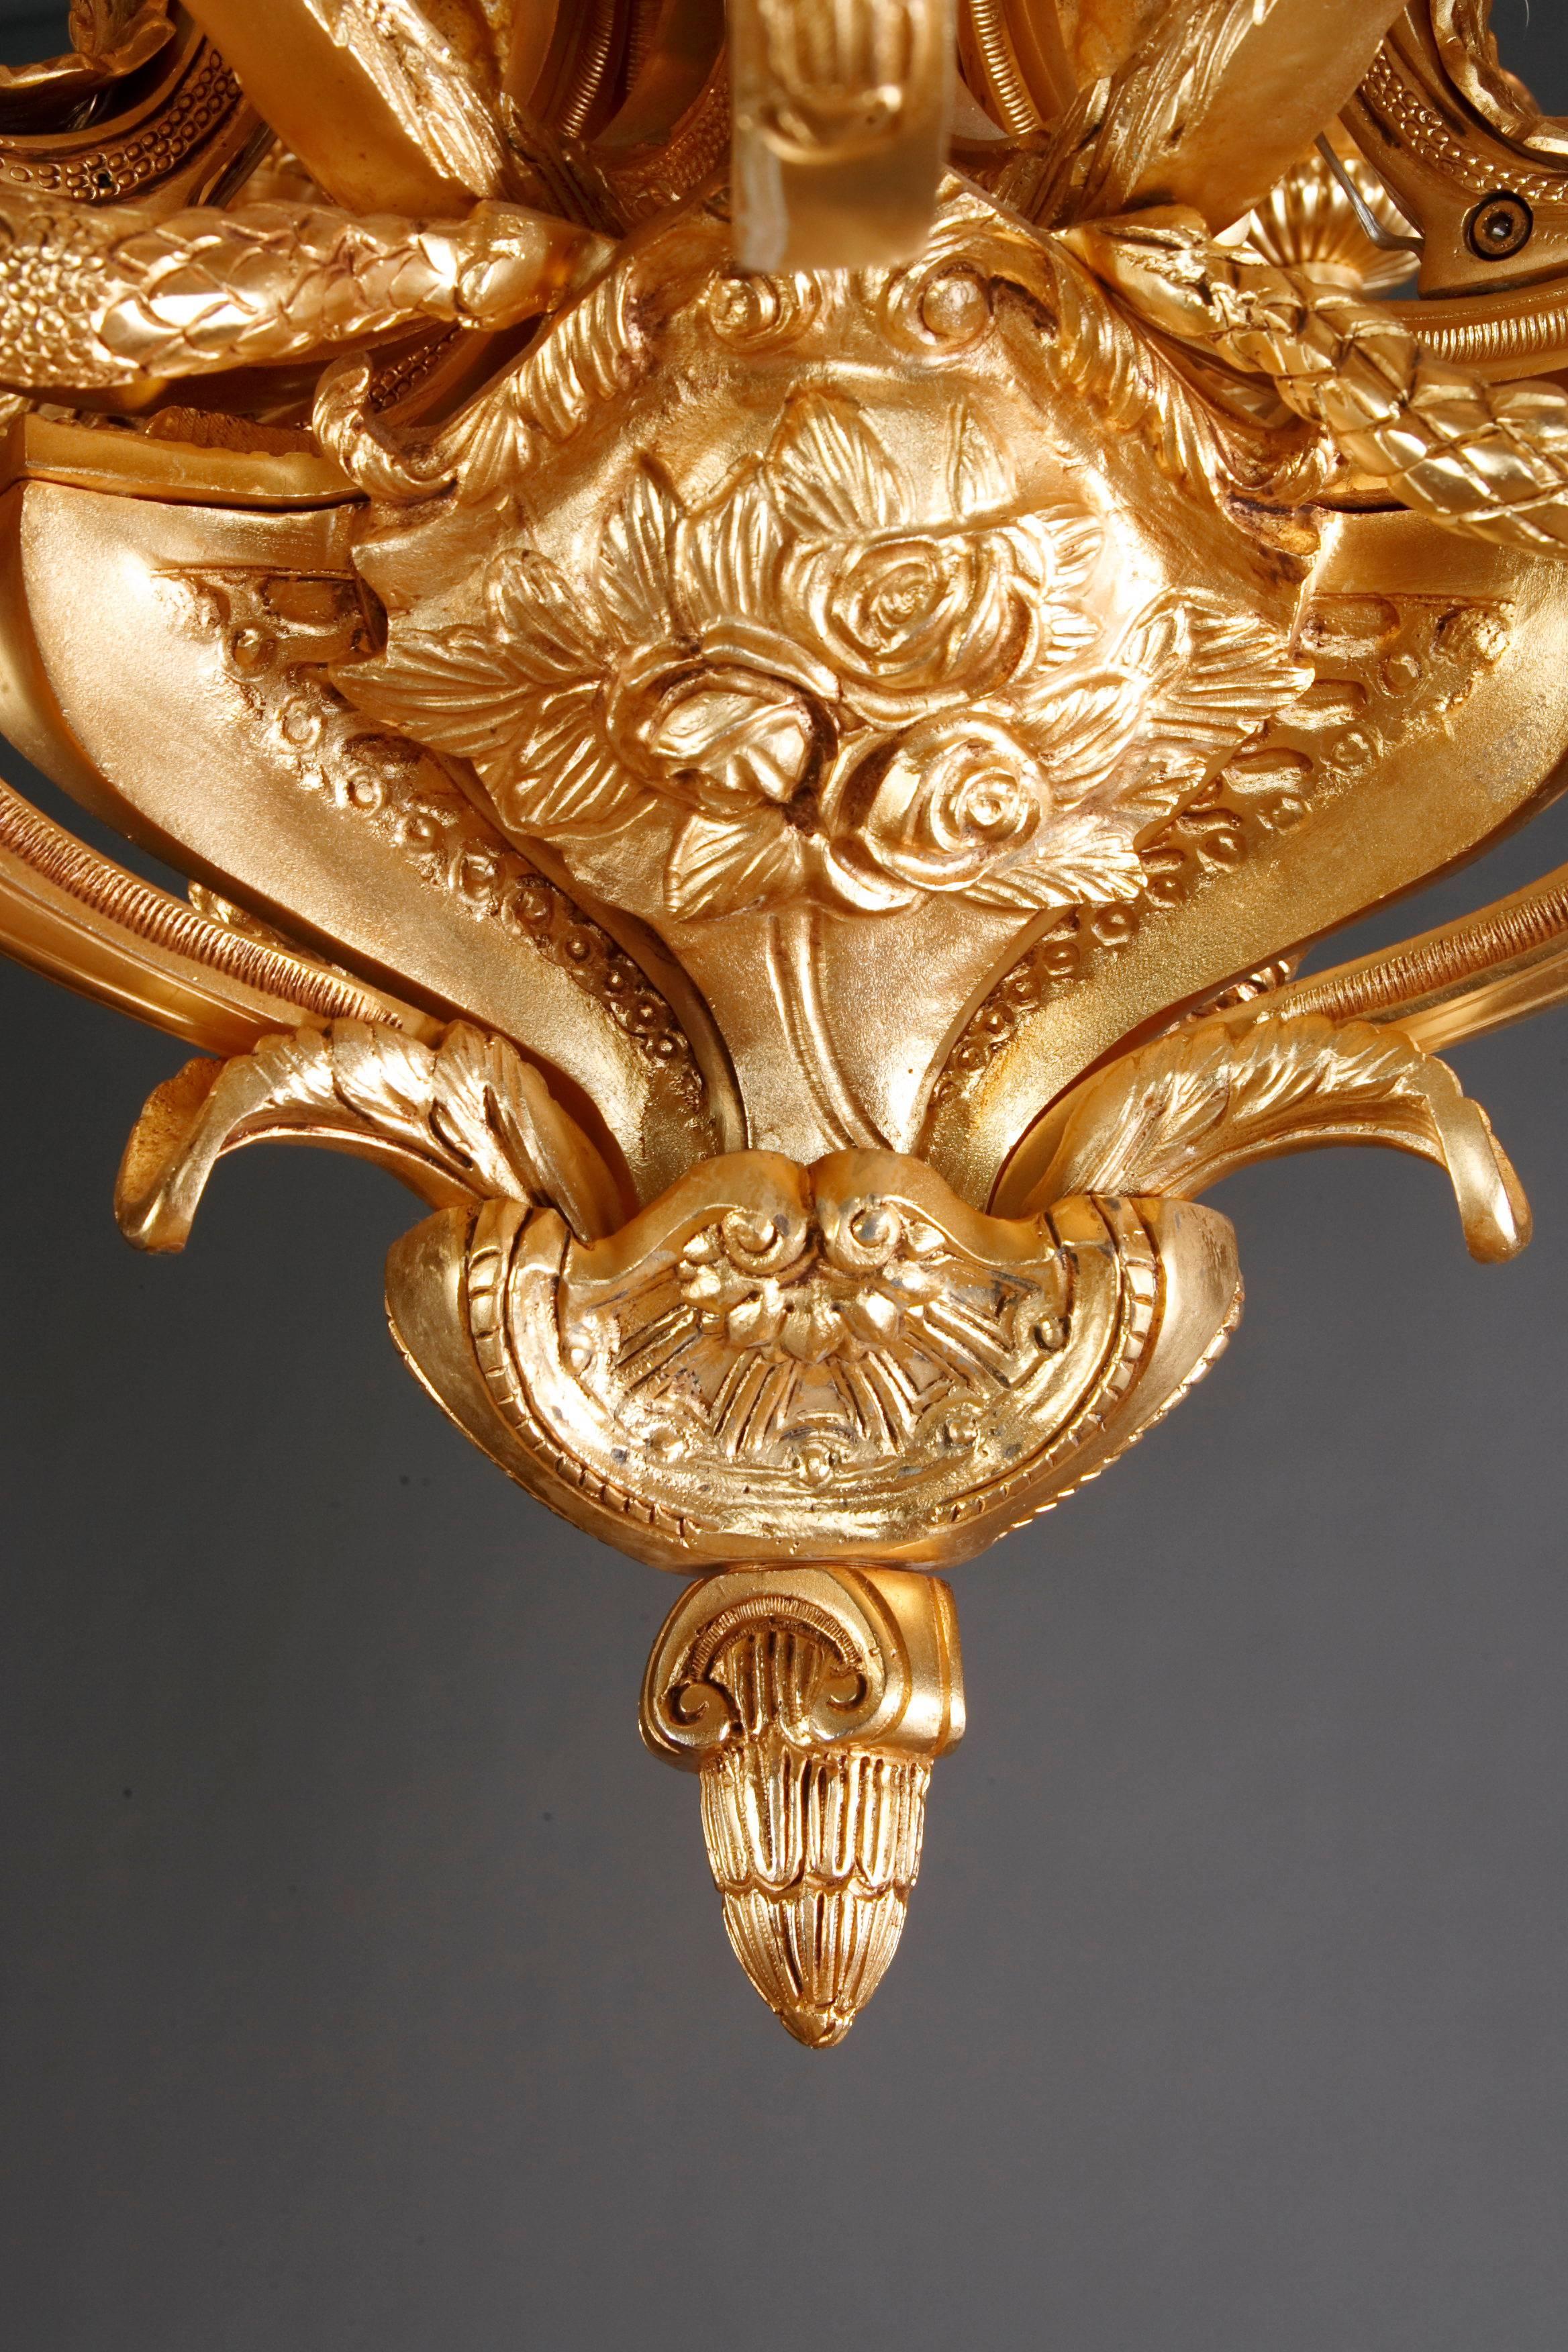 20th Century Ceiling Candelabra in Louis XIV Style